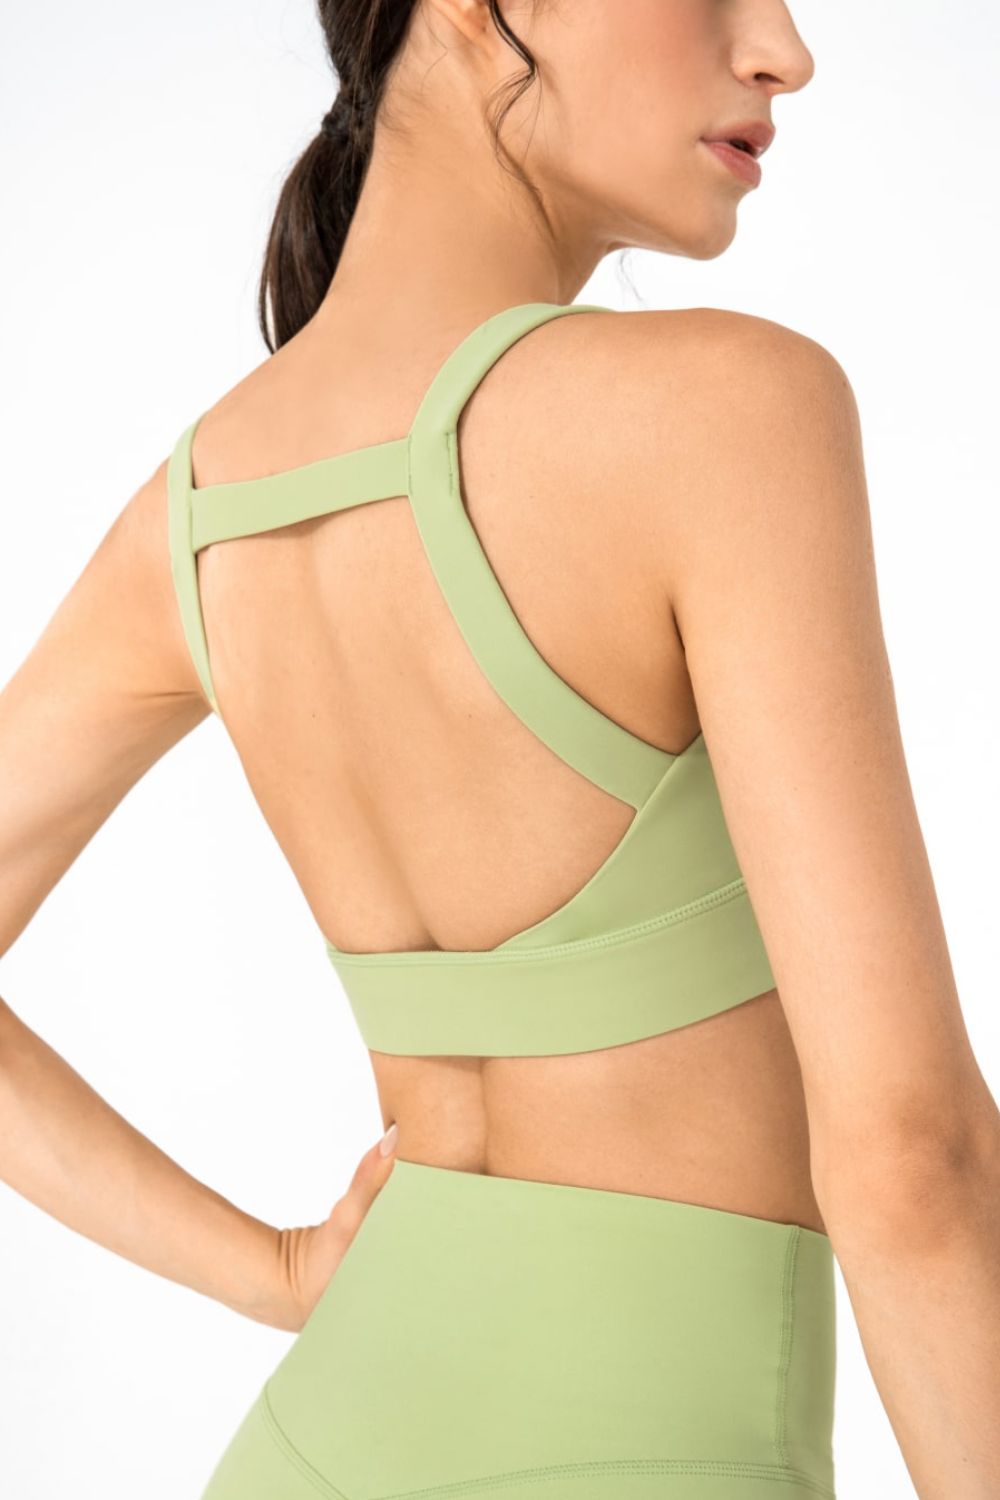 yoga top, yoga tops, crop tops, crop top, sports shirts, gym clothes, gym shirt, gym top, sexy shirts, nice workout clothes for women, nice crop tops, summer clothes, comfortable shirts, loungewear fashion, designer crop tops, fashion 2024, fashion 2025, outfit ideas, tiktok fashion, kesley boutique, birthday gifts, anniversary gifts, fashion gifts, womens clothing, popular clothes , cheap clothes, black sports bra, green  crop top, green top, sexy top, sexy shirt